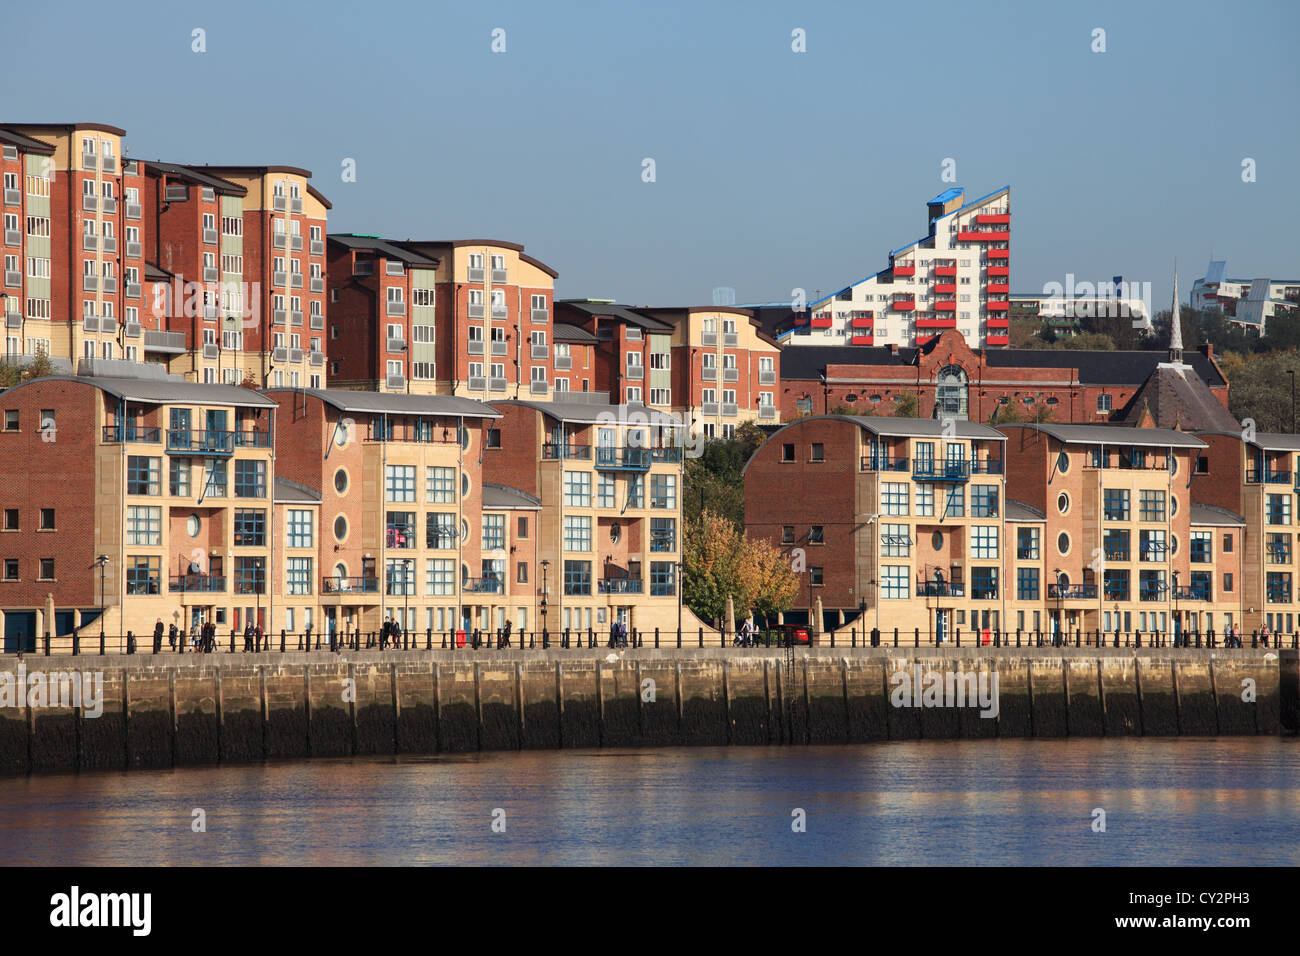 Riverside development on the north bank of the river Tyne at Newcastle, Byker Wall is visible in the background. Stock Photo